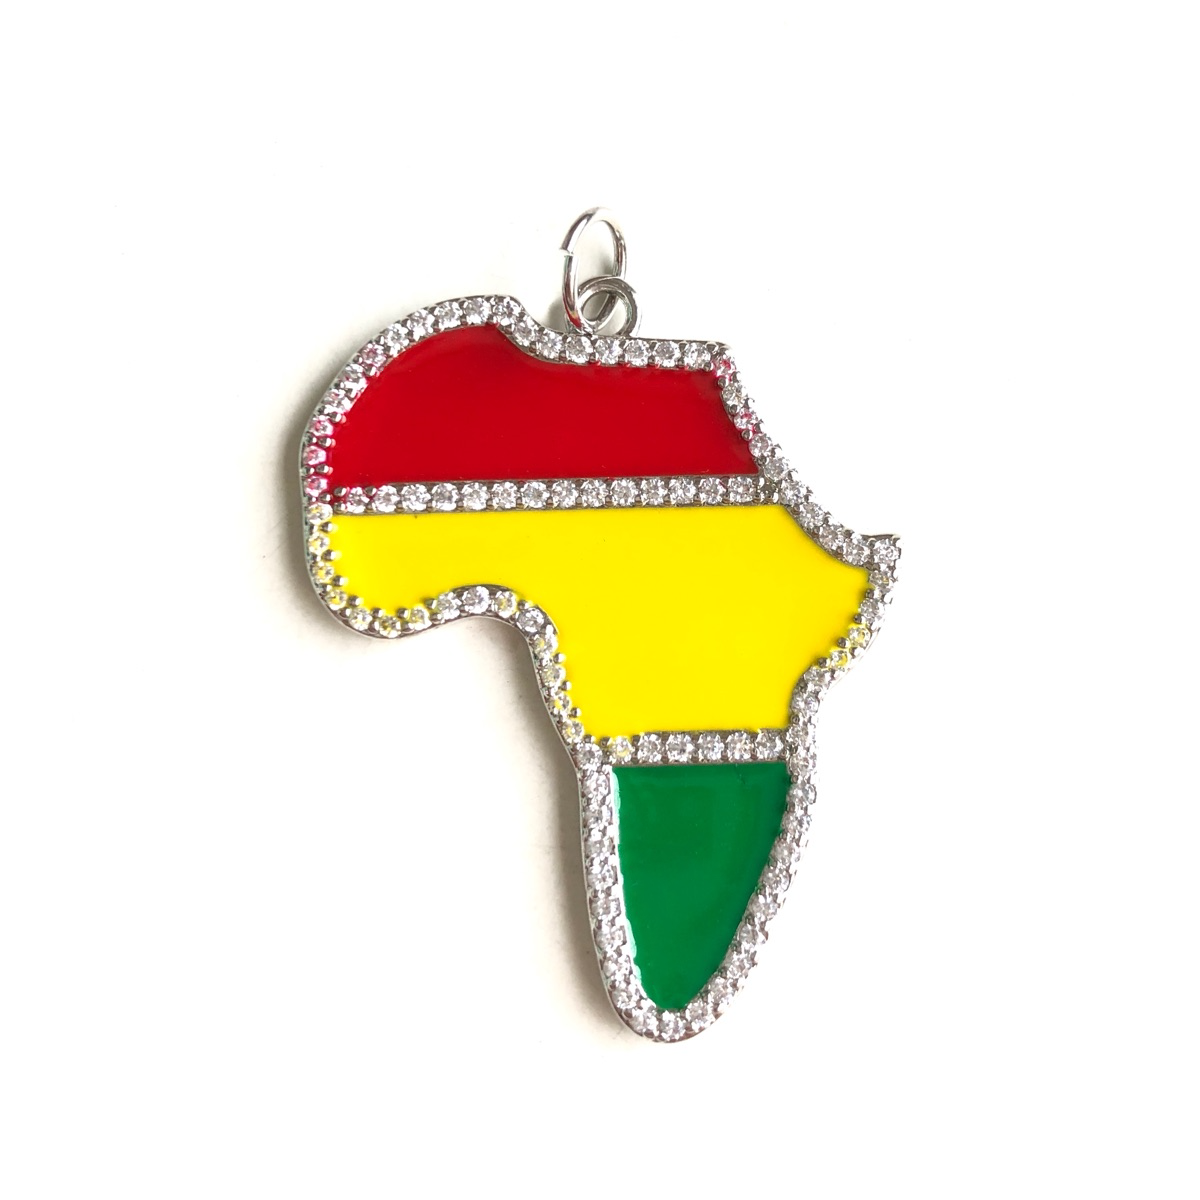 10pcs/lot Red Yellow Green Enamel Africa Map CZ Pave Charms for Black History Month Juneteenth Awareness Silver CZ Paved Charms Juneteenth & Black History Month Awareness New Charms Arrivals Charms Beads Beyond